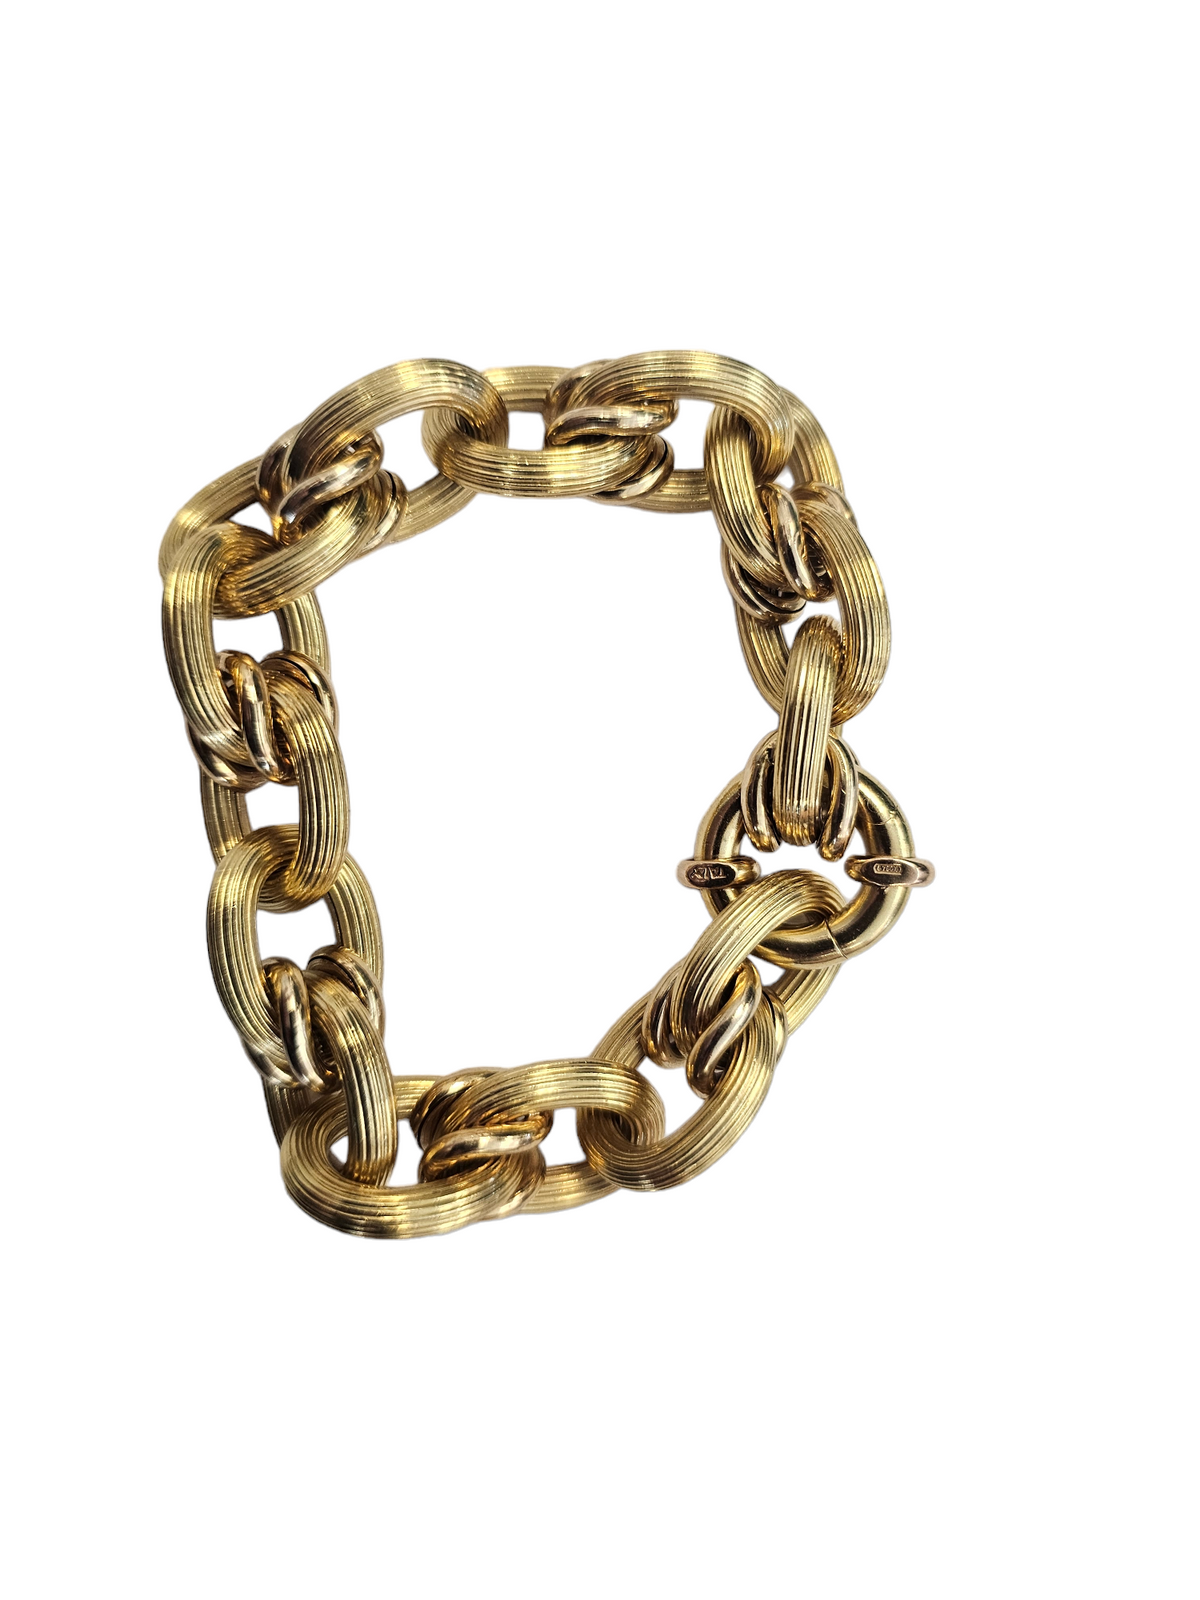 Fancy Thick Link Italian made textured bracelet made in 18-karat yellow gold